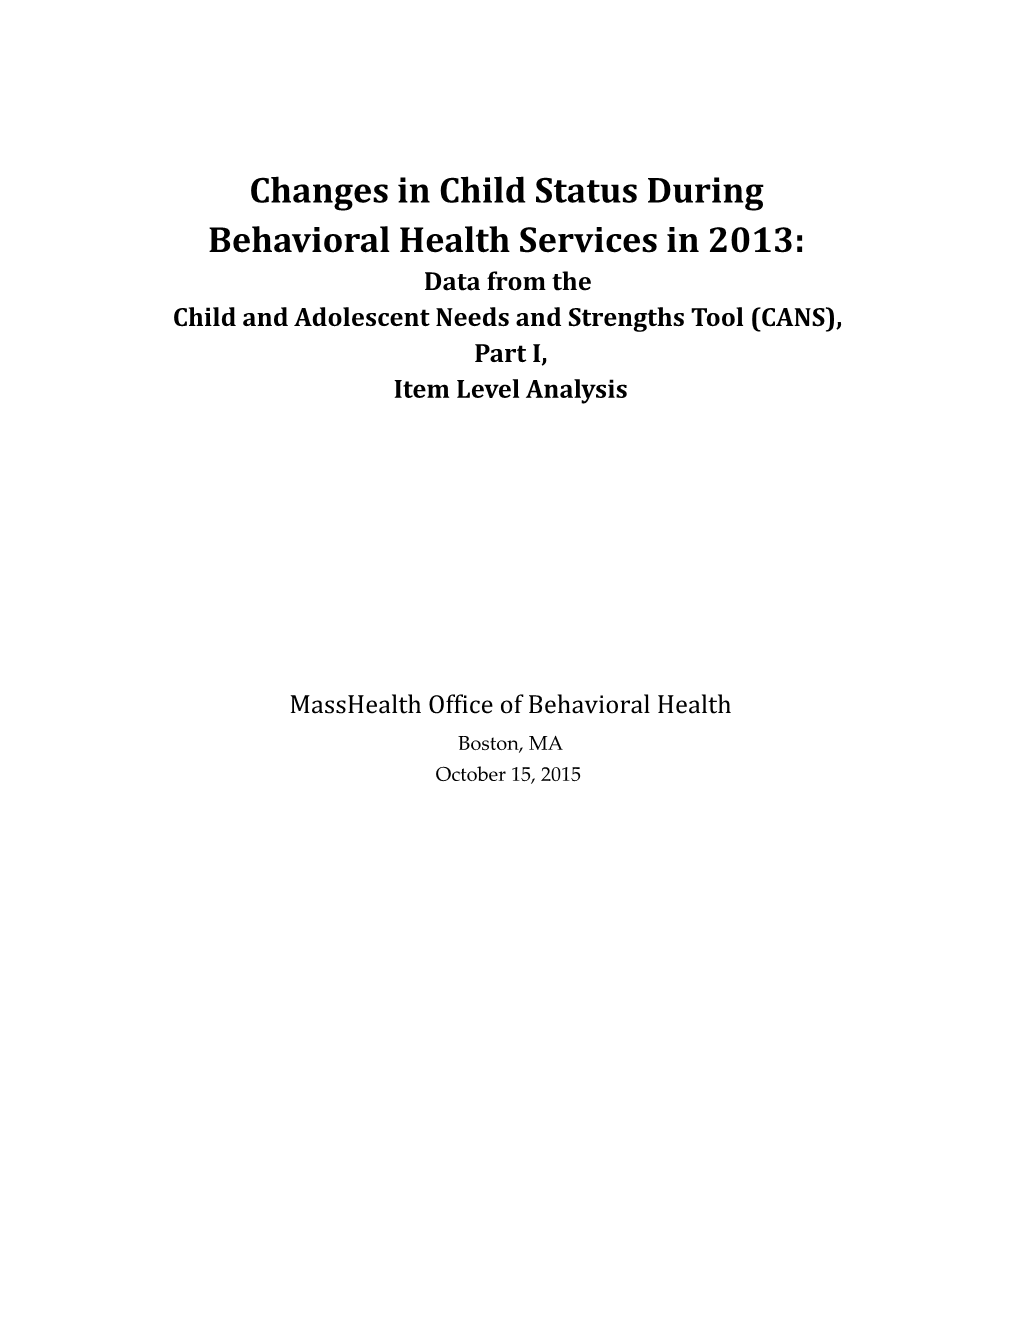 Changes in Child Status During